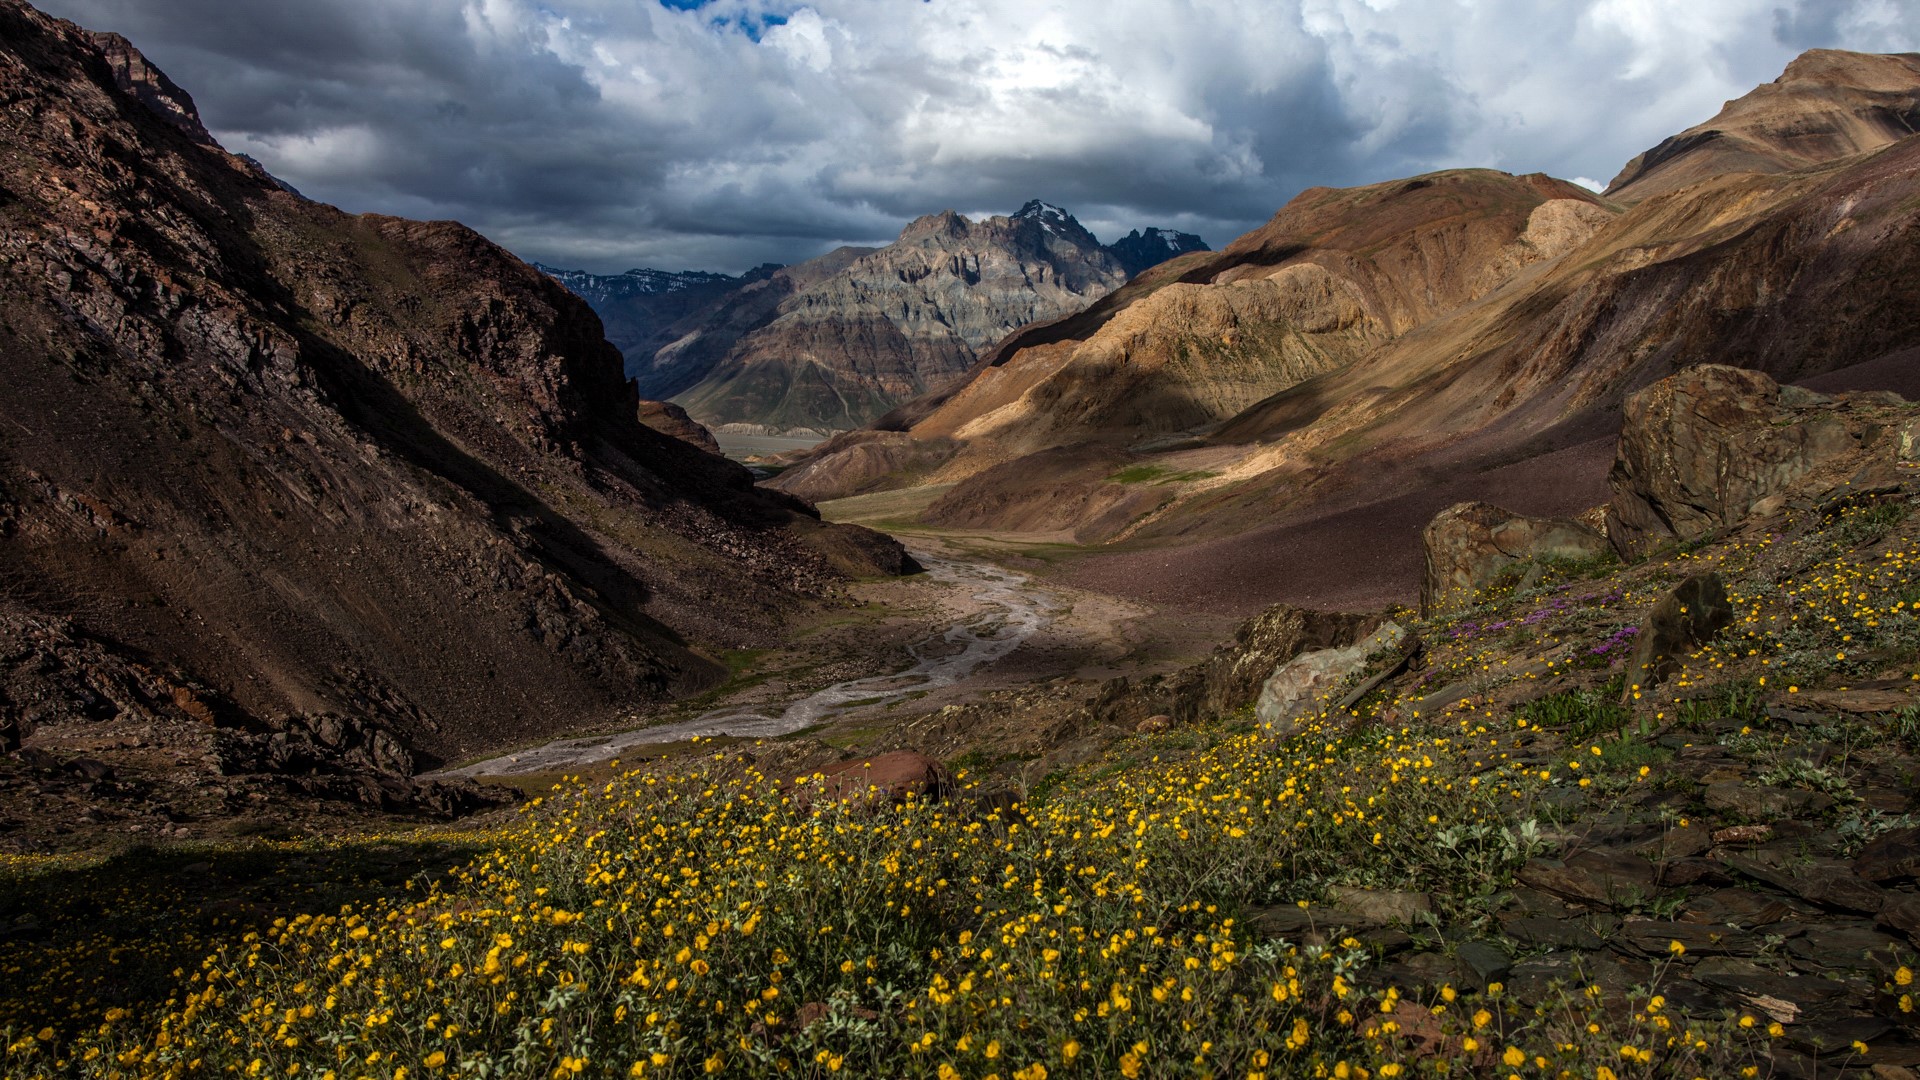 Nature Landscape Mountains Clouds Sky River Valley Plants Yellow Flowers Rocks Monsoon Spiti Valley  1920x1080